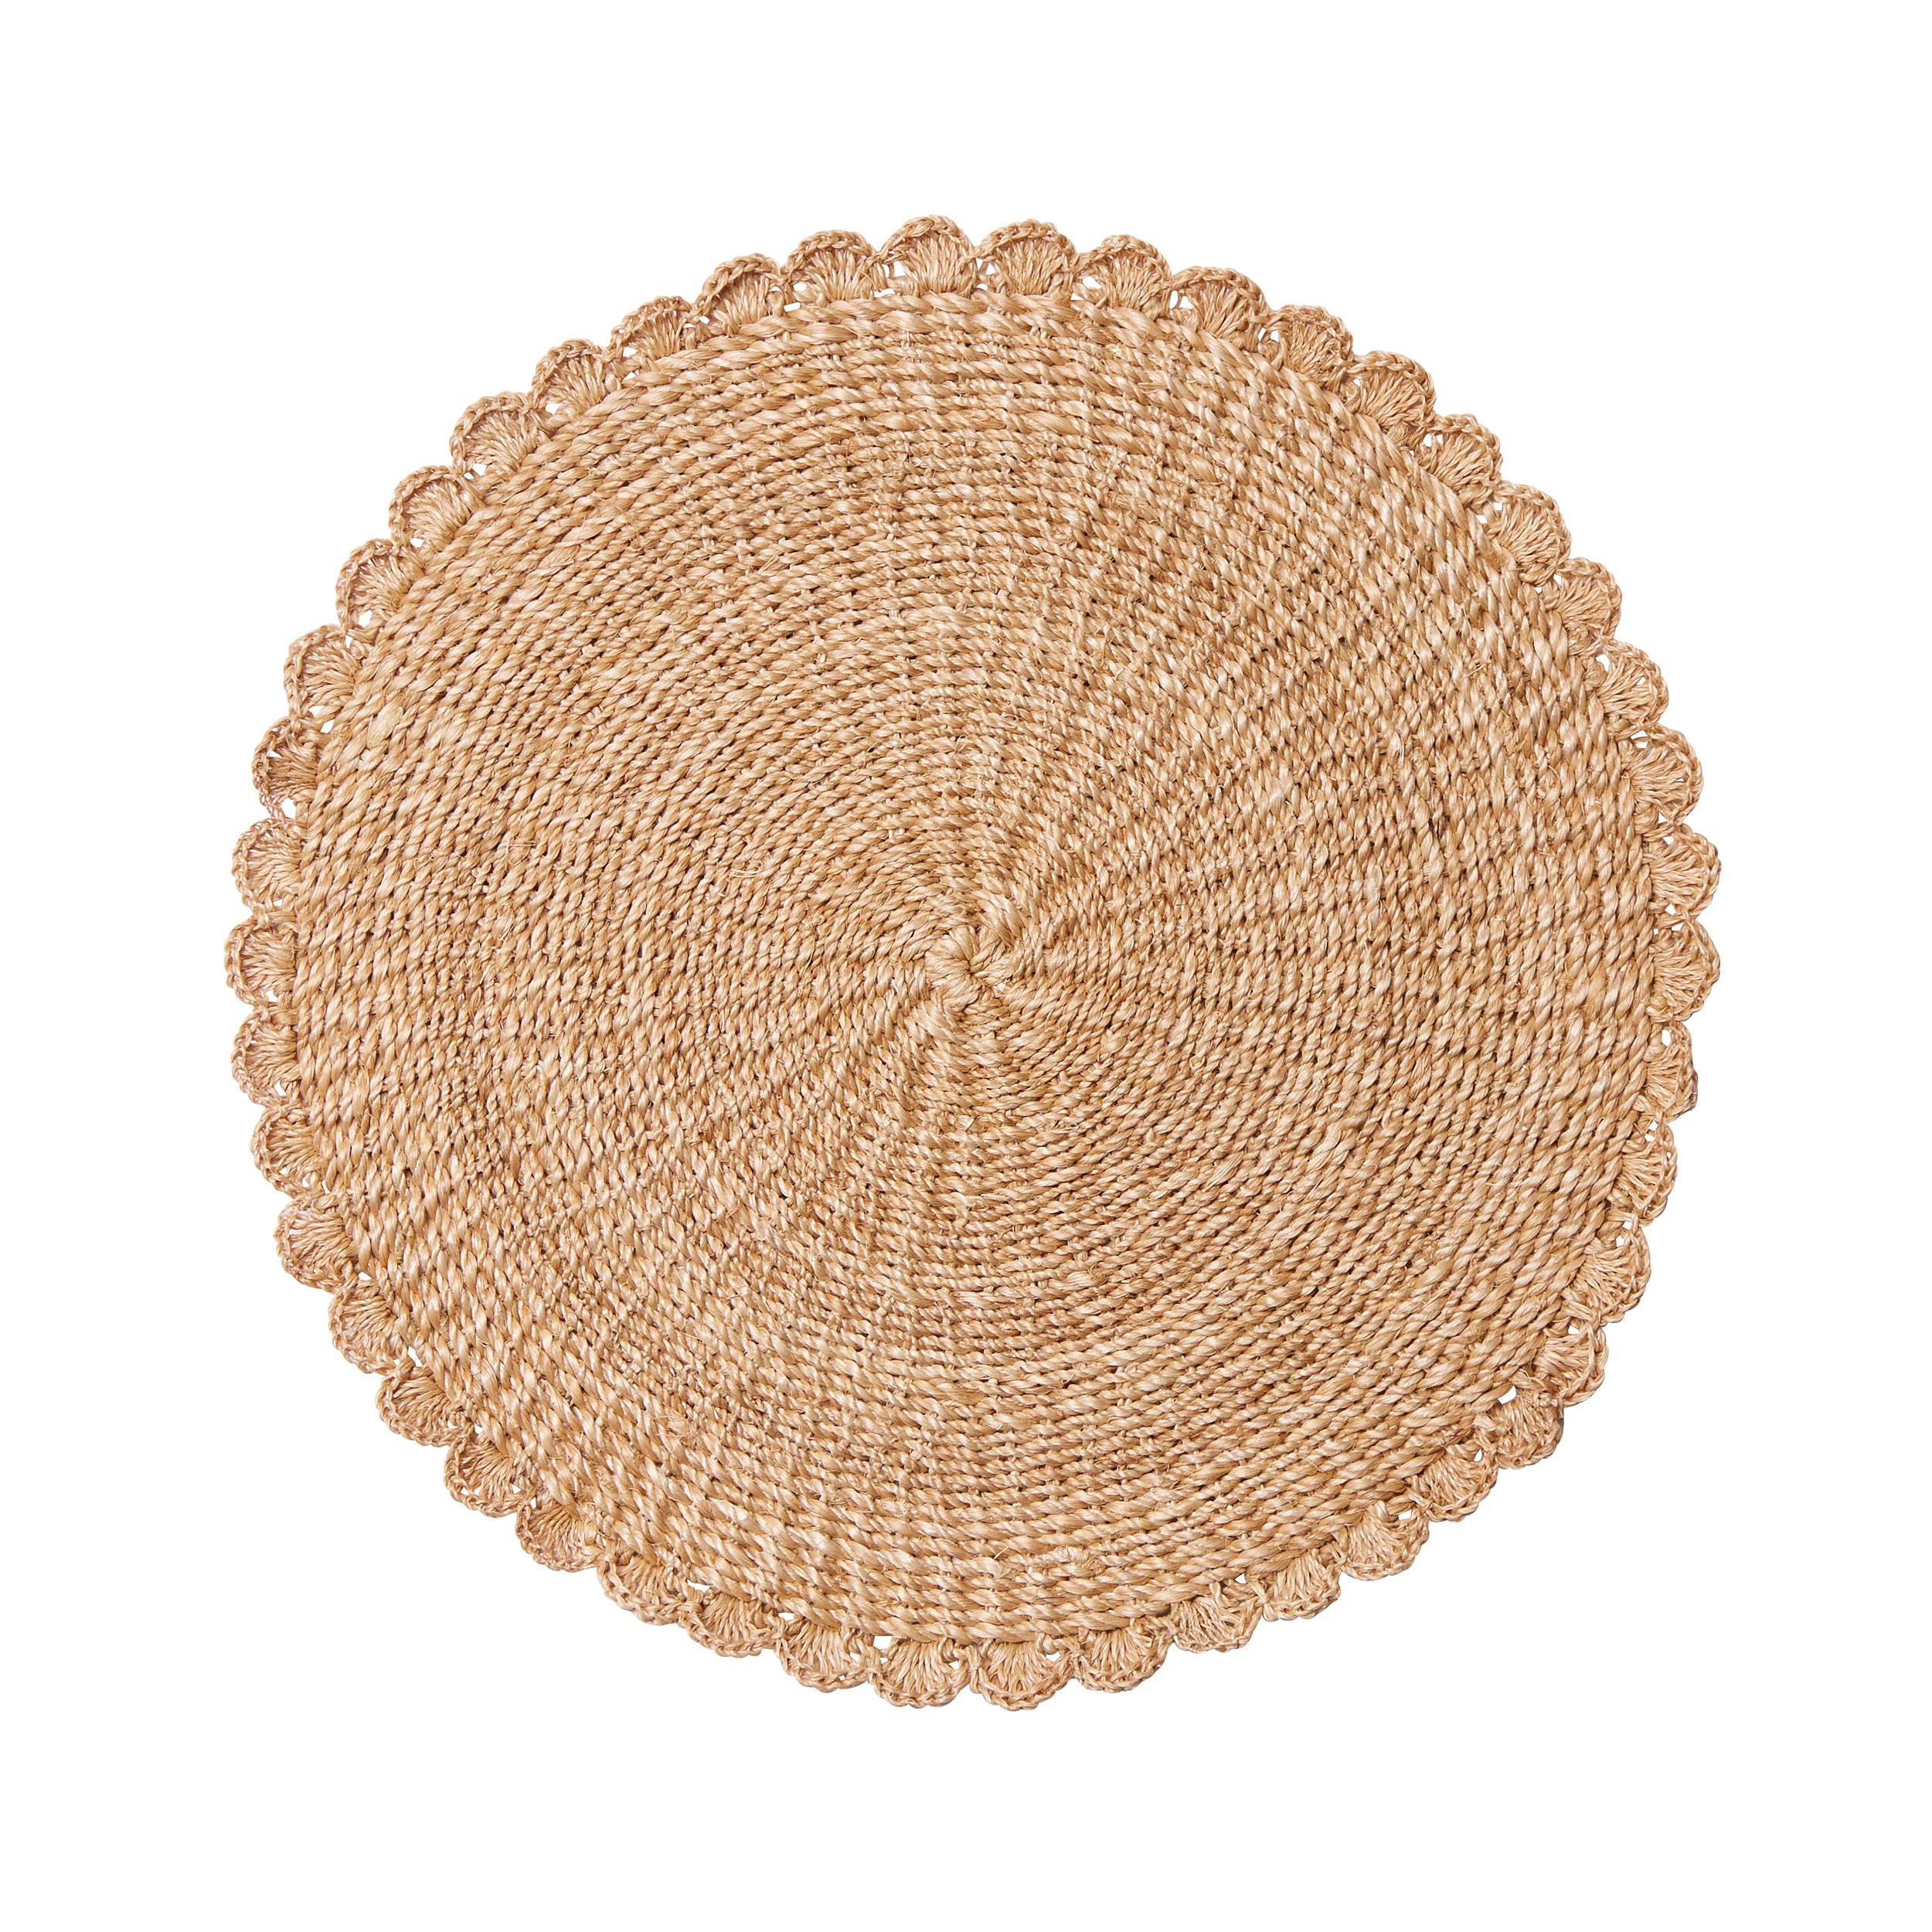 12.REBECCA UDALL Scalloped Handwoven Abaca Placemat, Fern €26